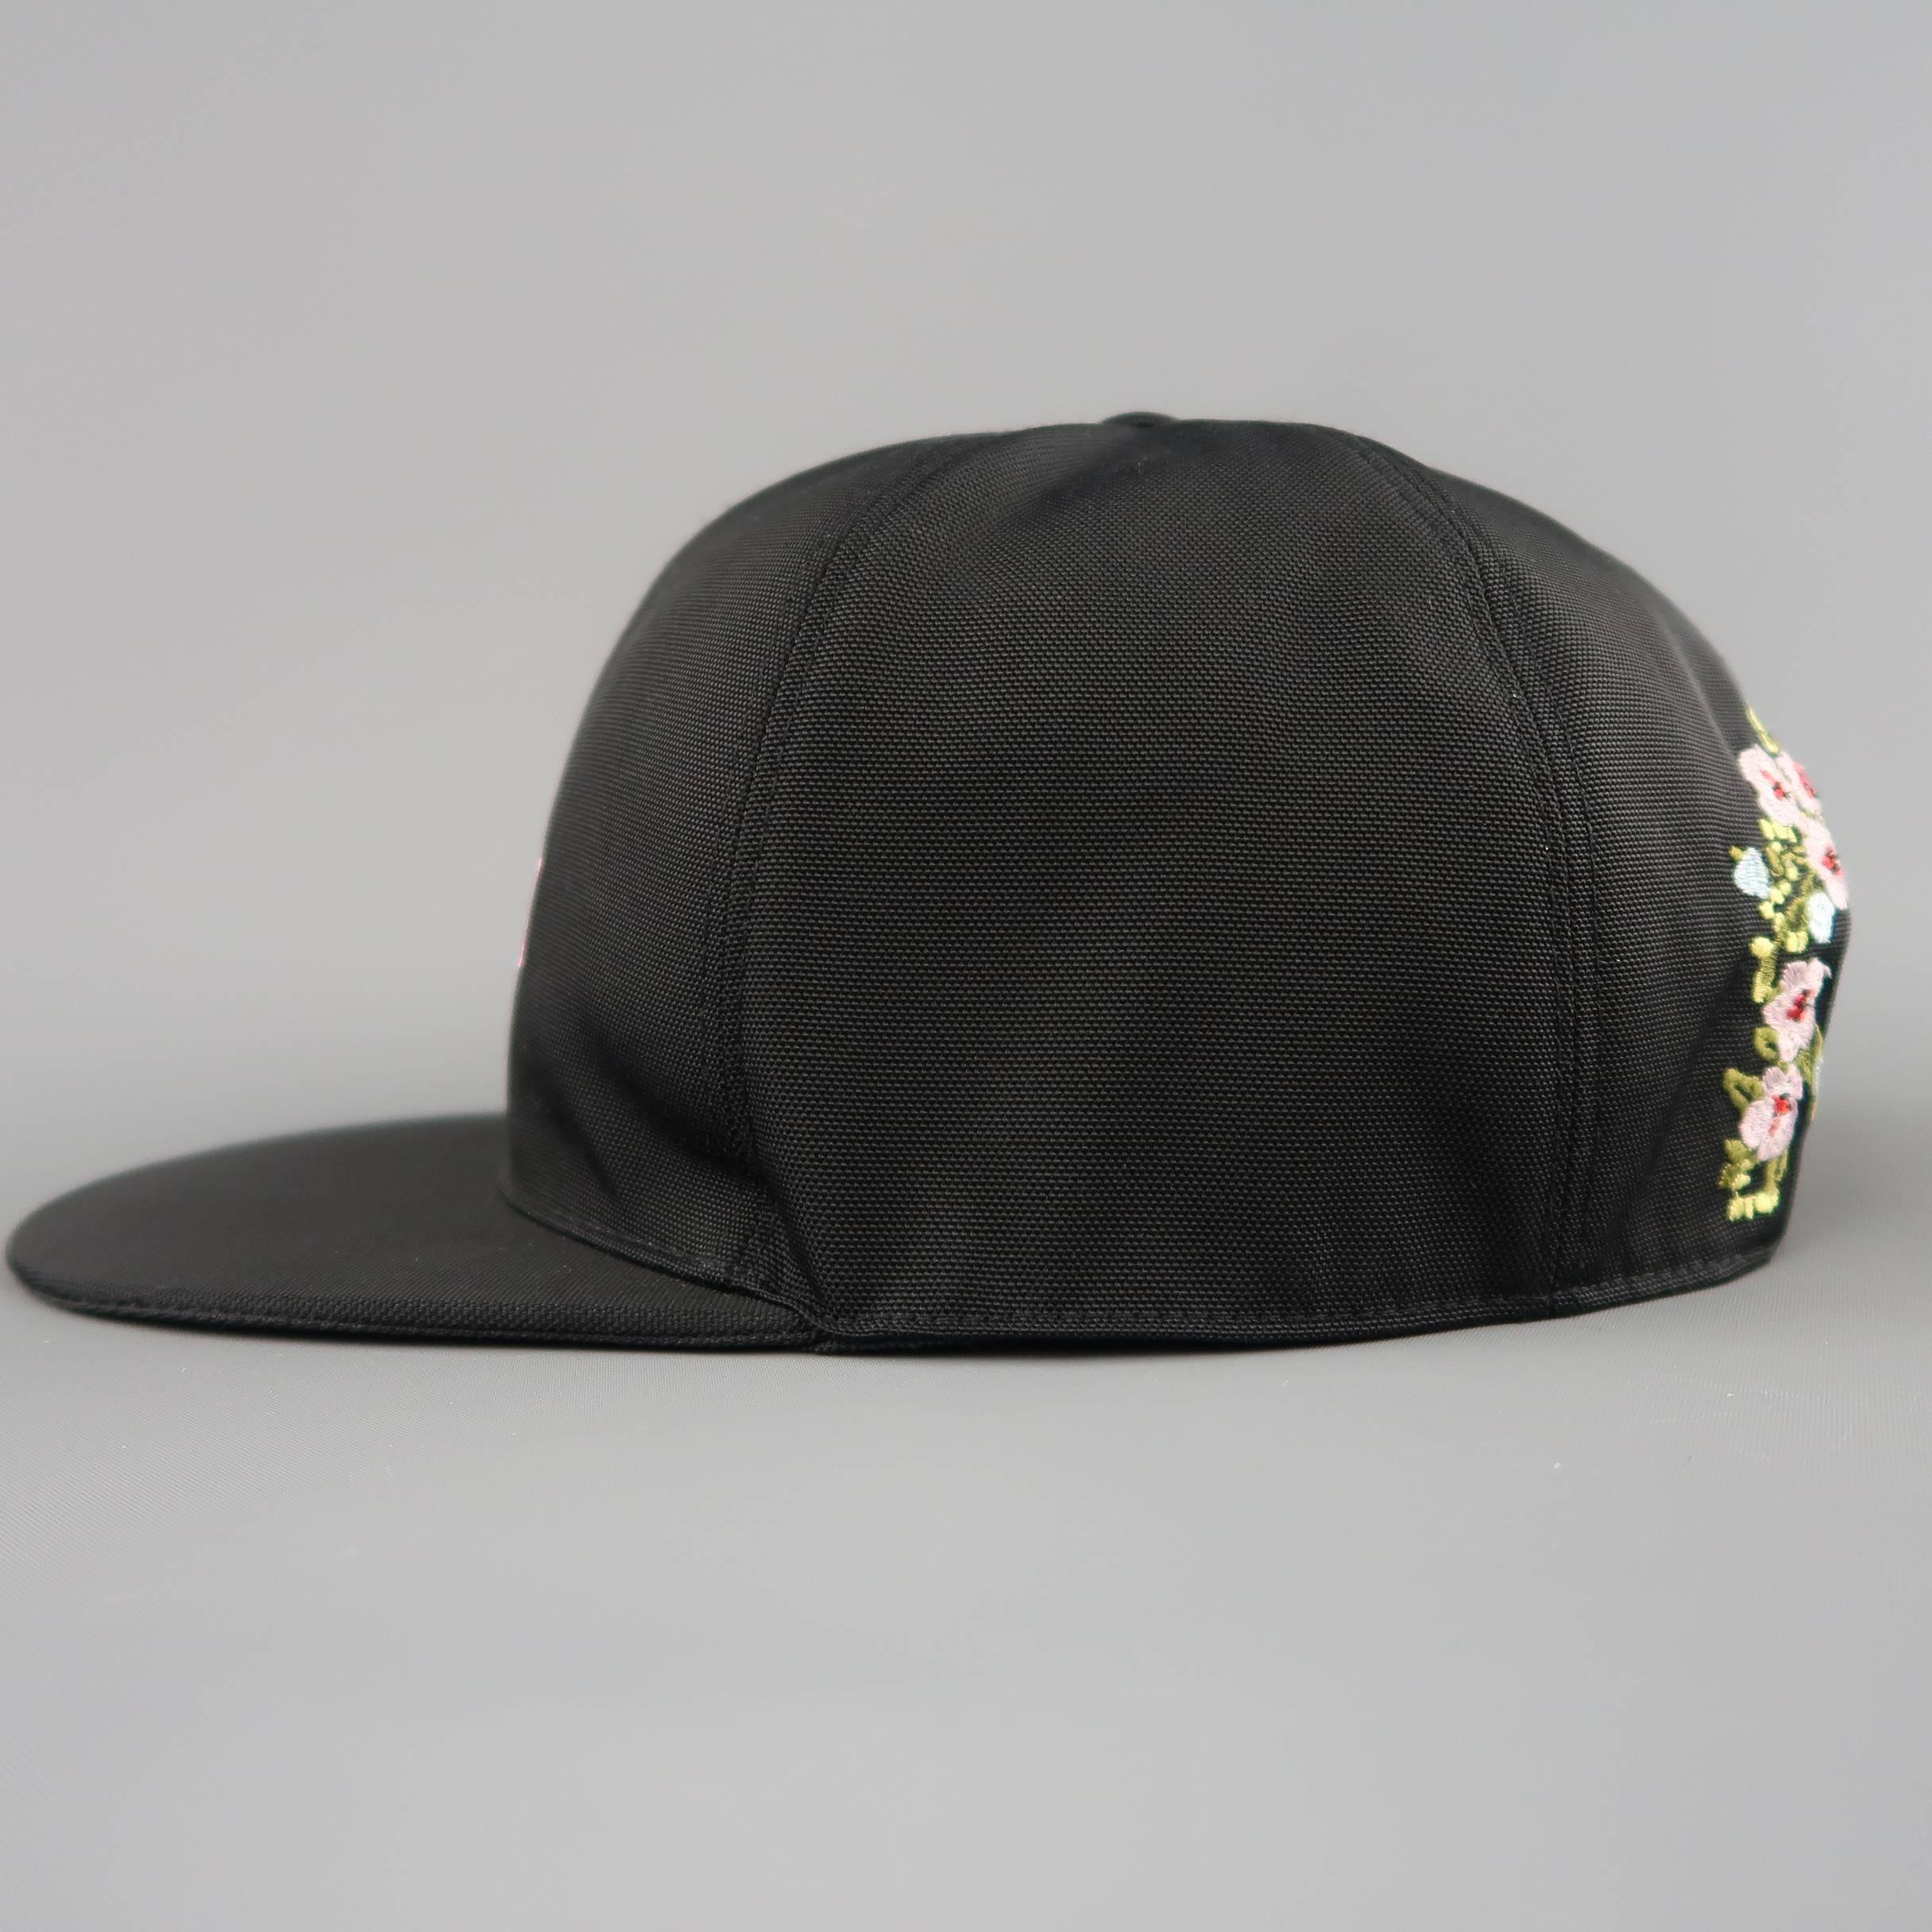 givenchy hat